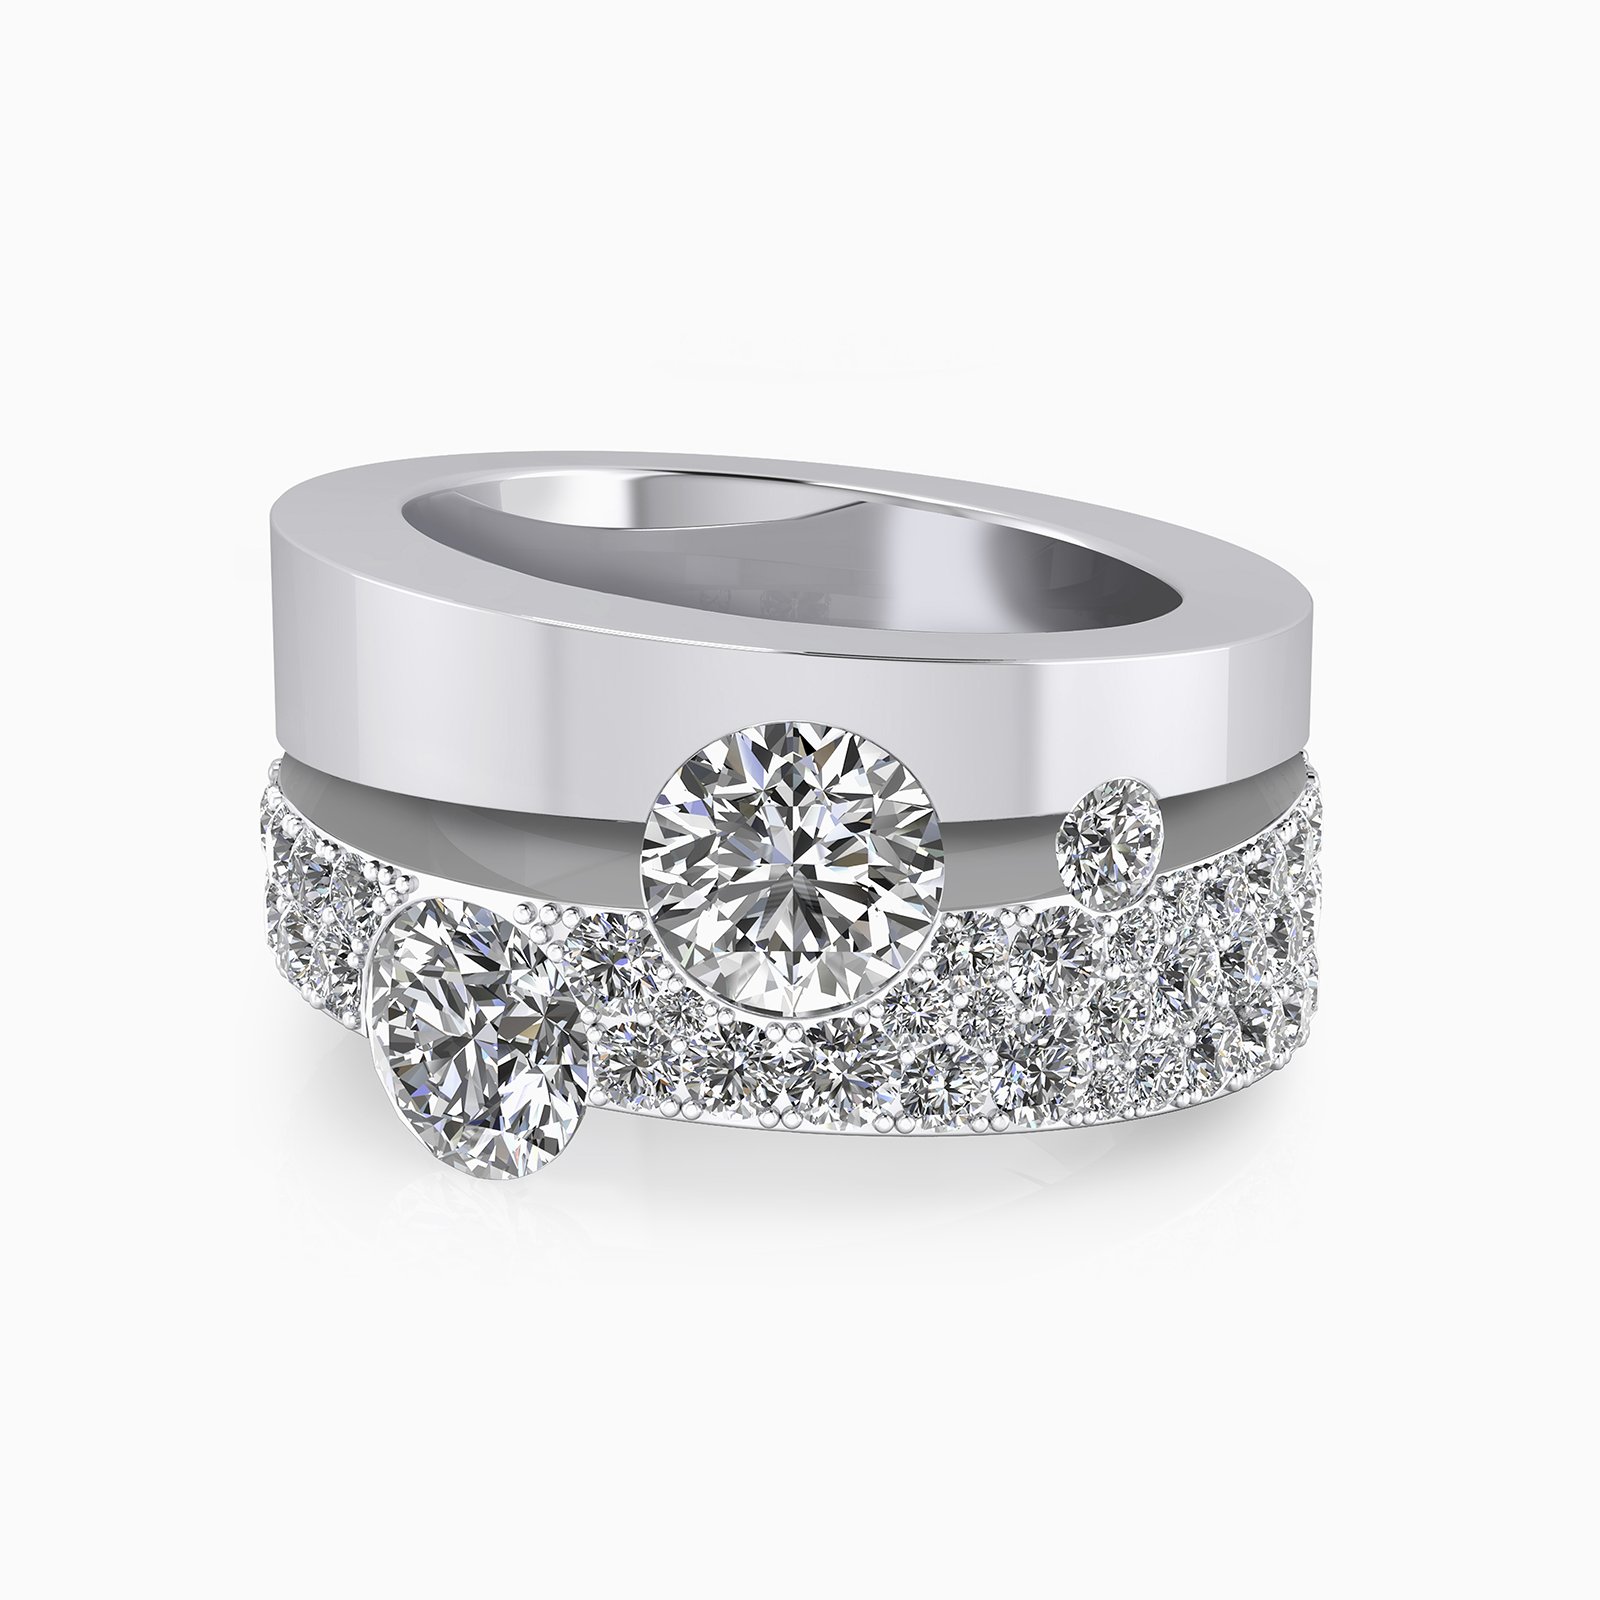 Selected ring for the promotion of engagement rings of Clemència Peris, in the Christmas campaign for thanksgiving